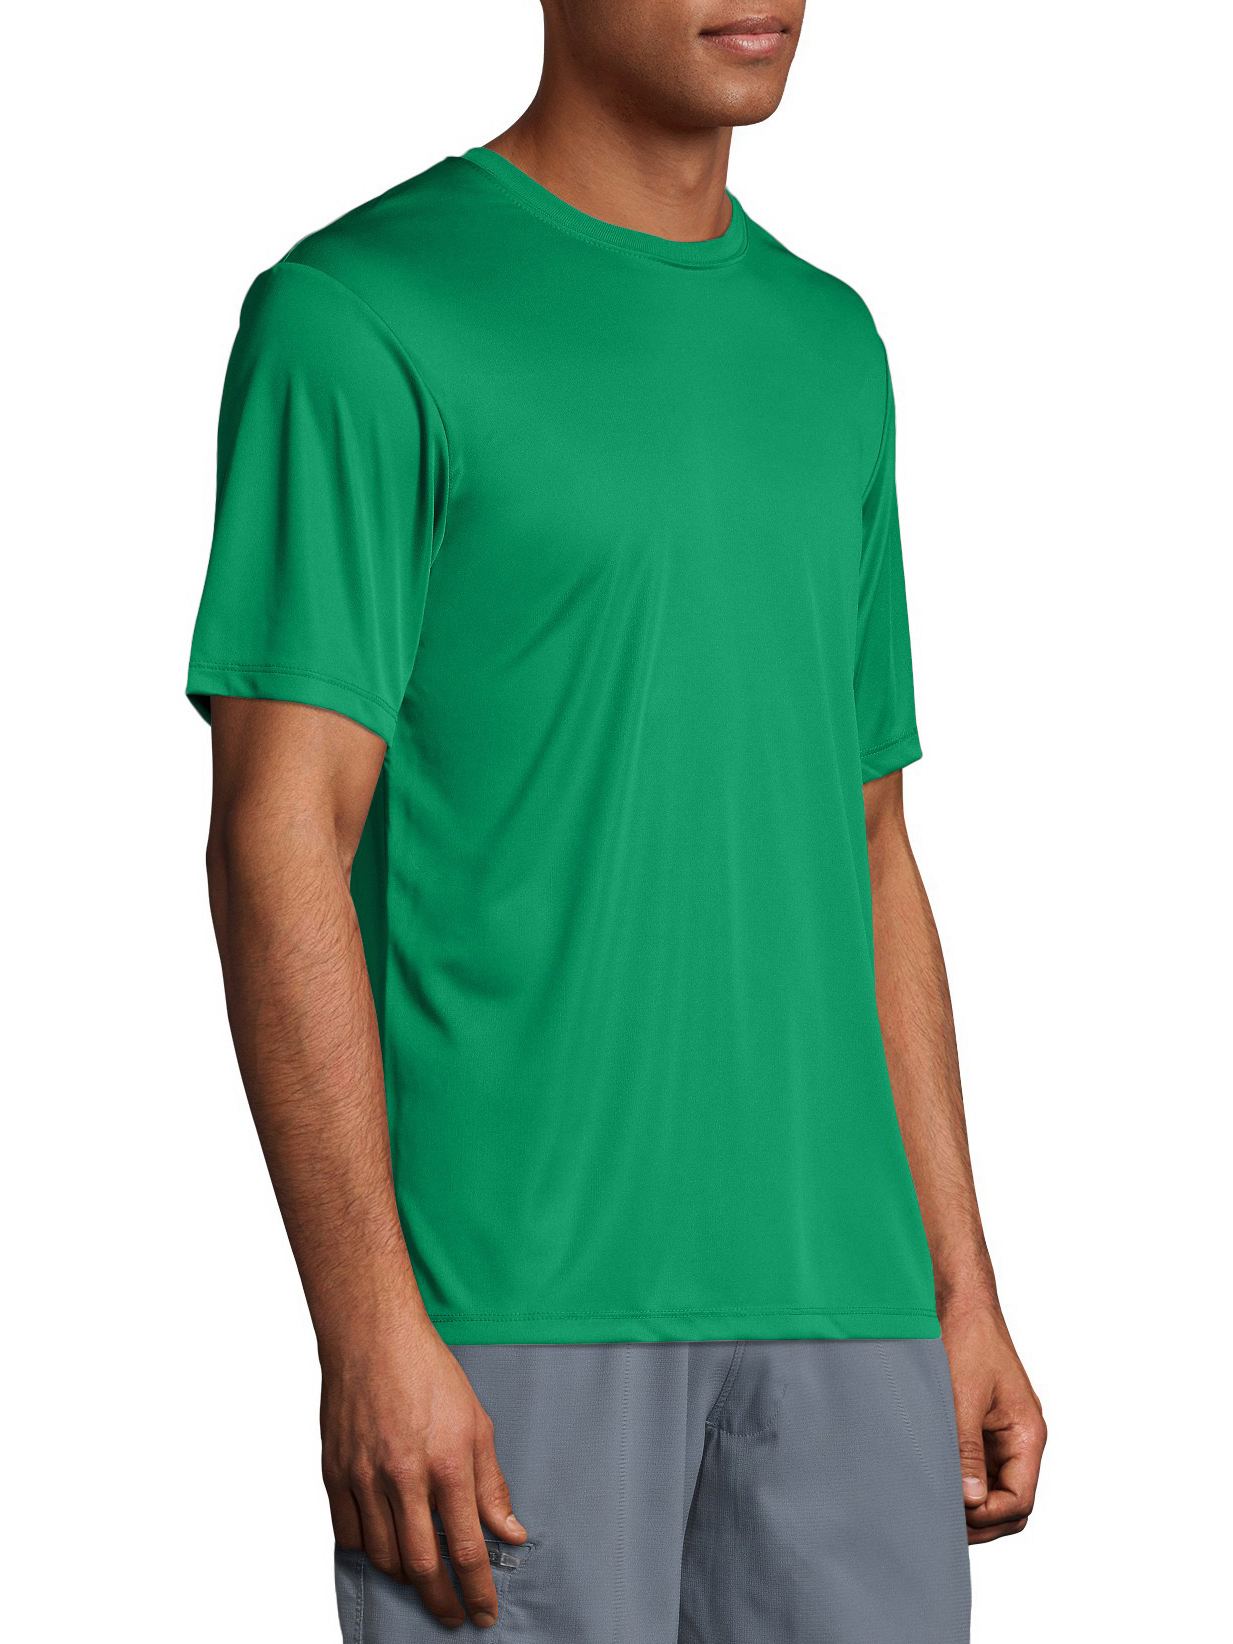 Hanes Sport Men's and Big Men's Short Sleeve Cool Dri Performance Tee (40+ UPF), Up to Size 3XL - image 5 of 6